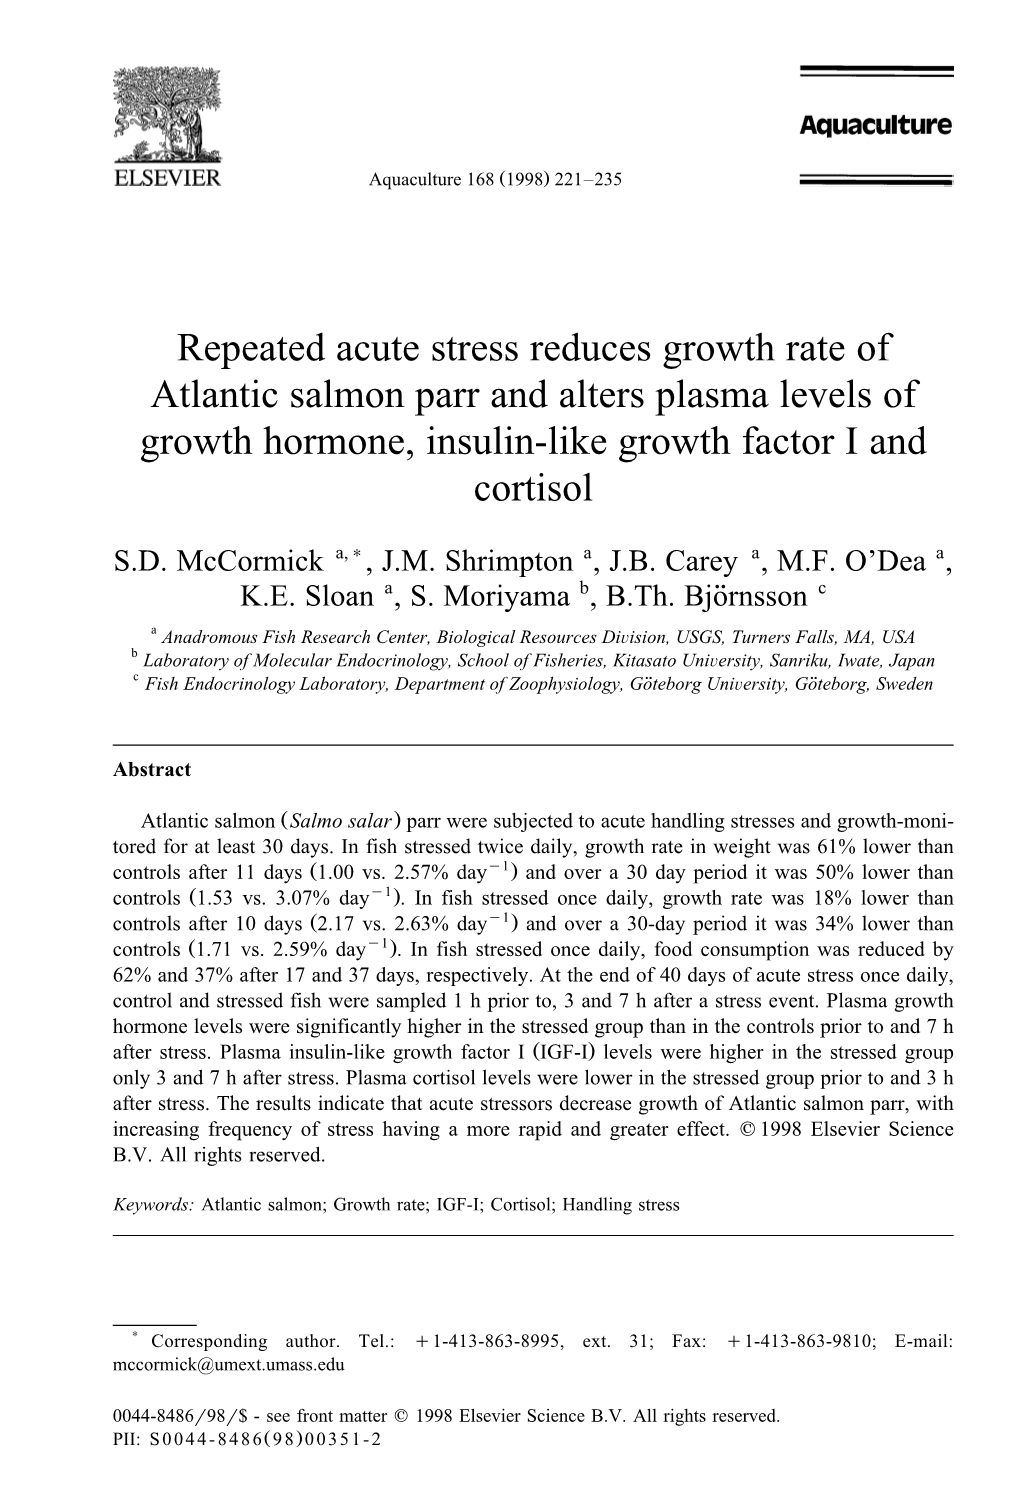 Repeated Acute Stress Reduces Growth Rate of Atlantic Salmon Parr and Alters Plasma Levels of Growth Hormone, Insulin-Like Growth Factor I and Cortisol